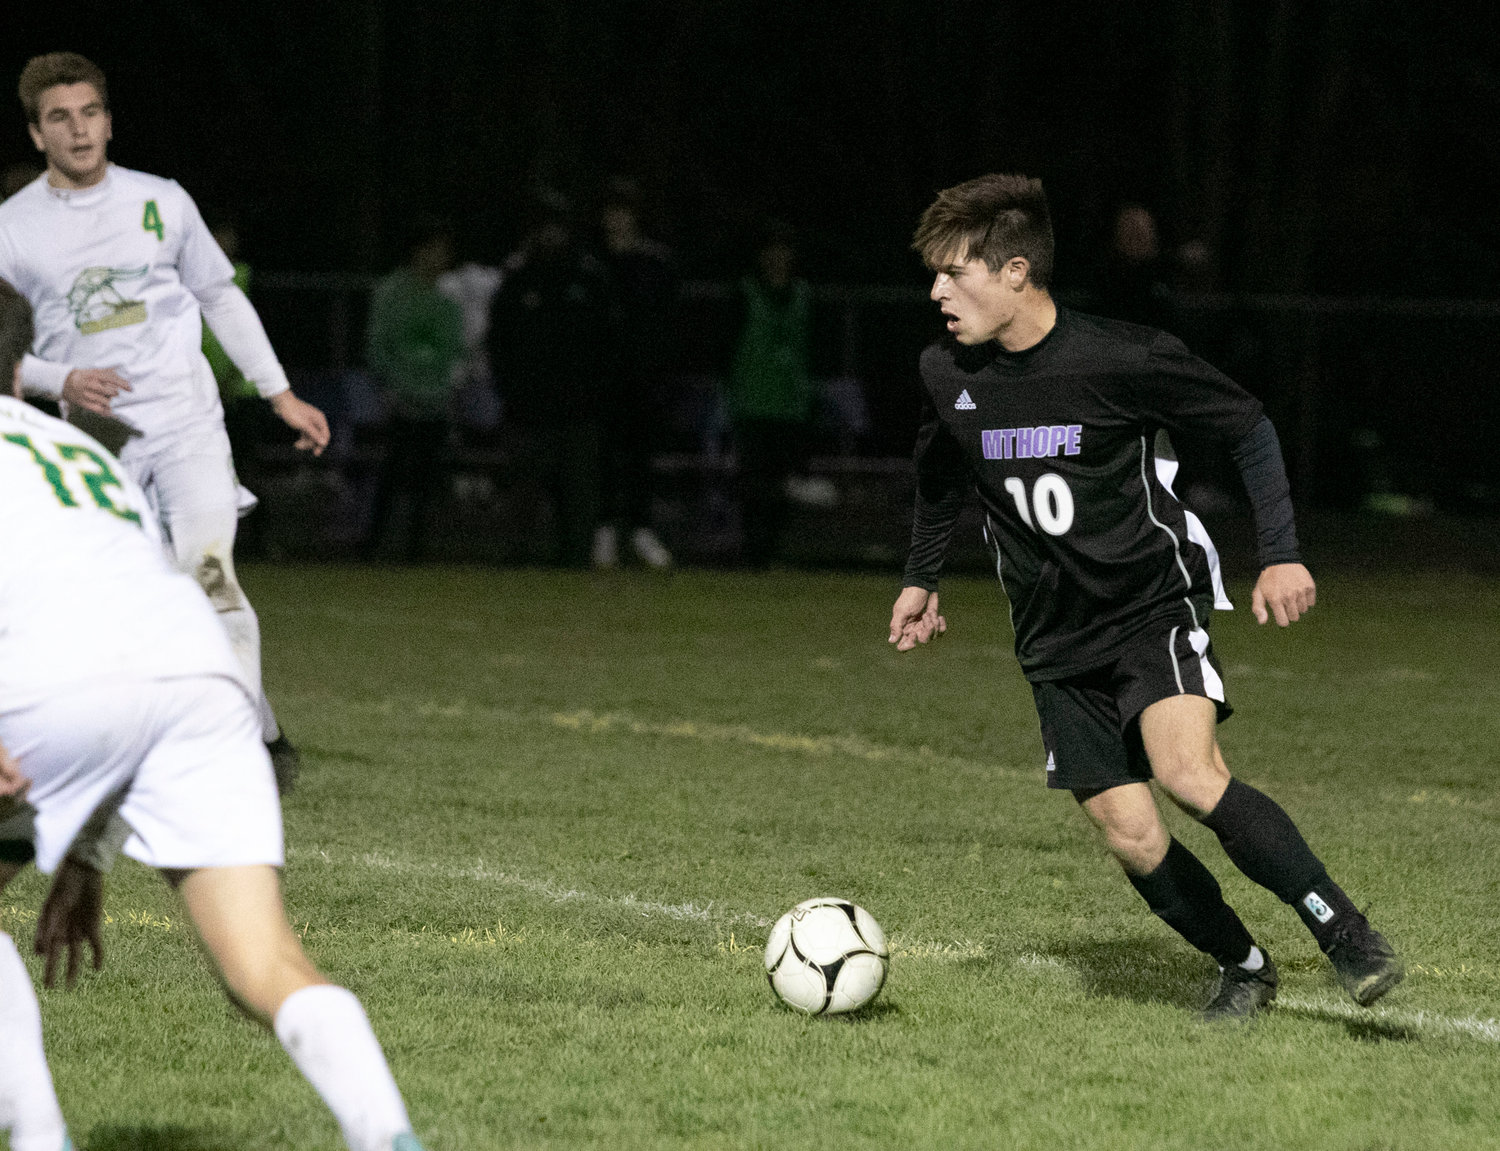 Huskies midfielder Nick Andreozzi dribbles the ball up field in the first half. The Huskies co-captain re-injured his leg in the second half, a big blow for the Huskies who could have used his leadership on the field, down the stretch.